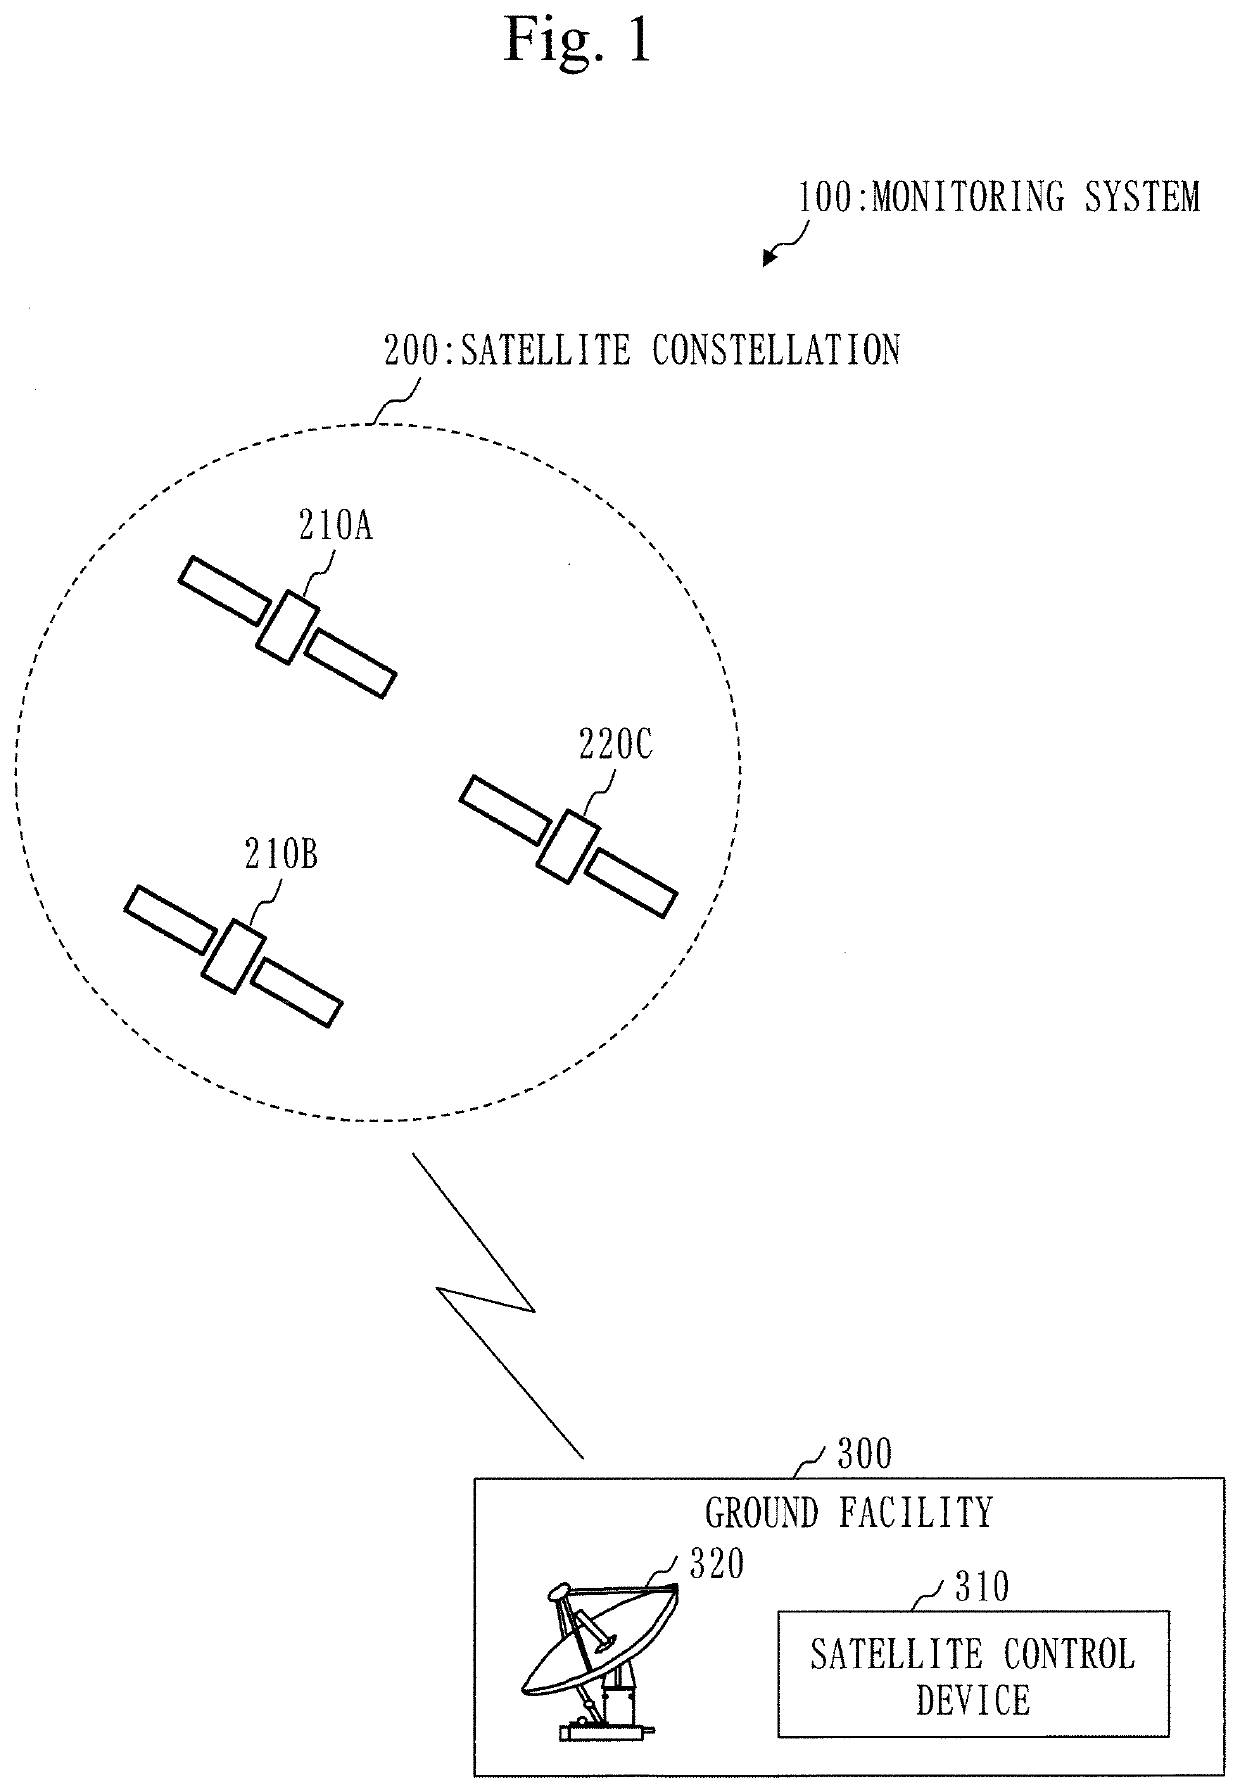 Satellite constellation, ground facility and artificial satellite